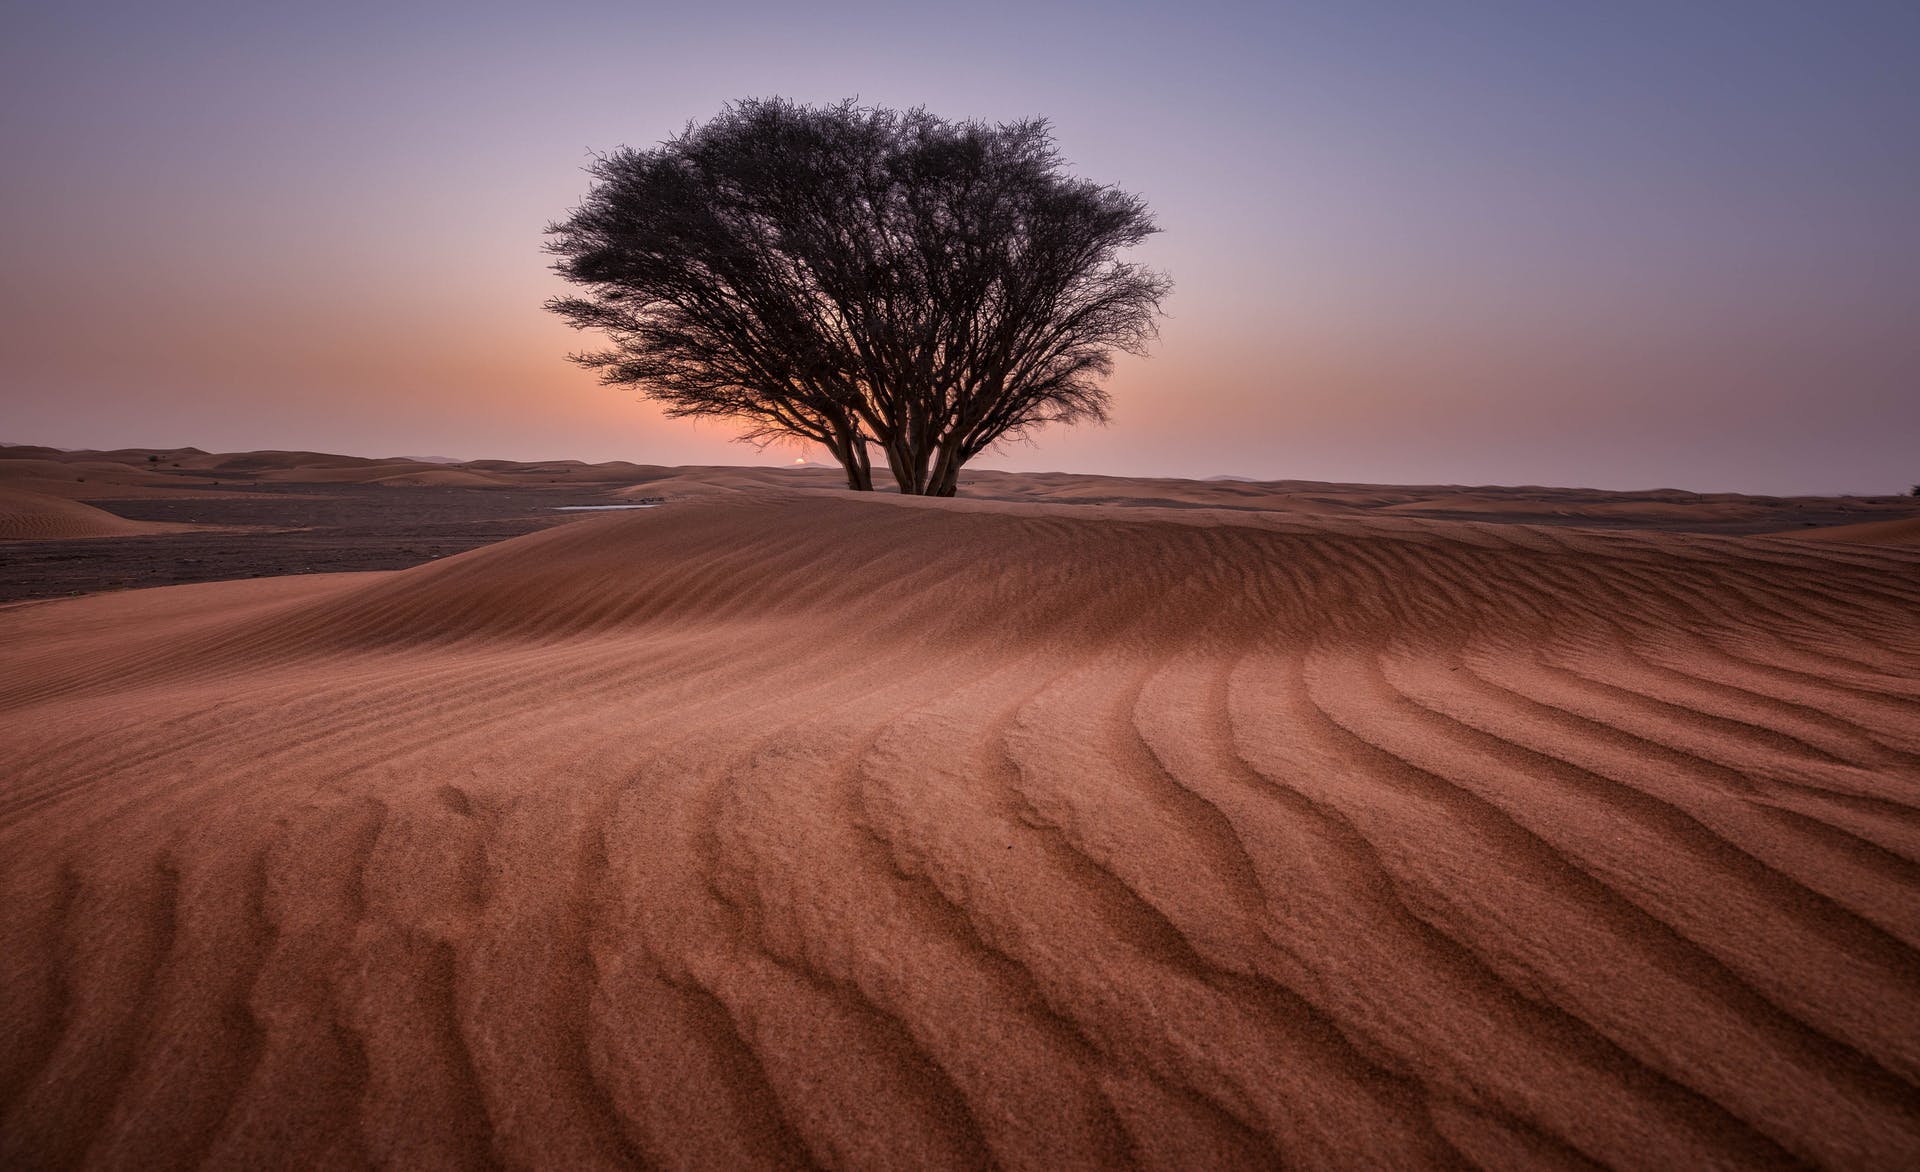 The Tree In Dune Wallpapers